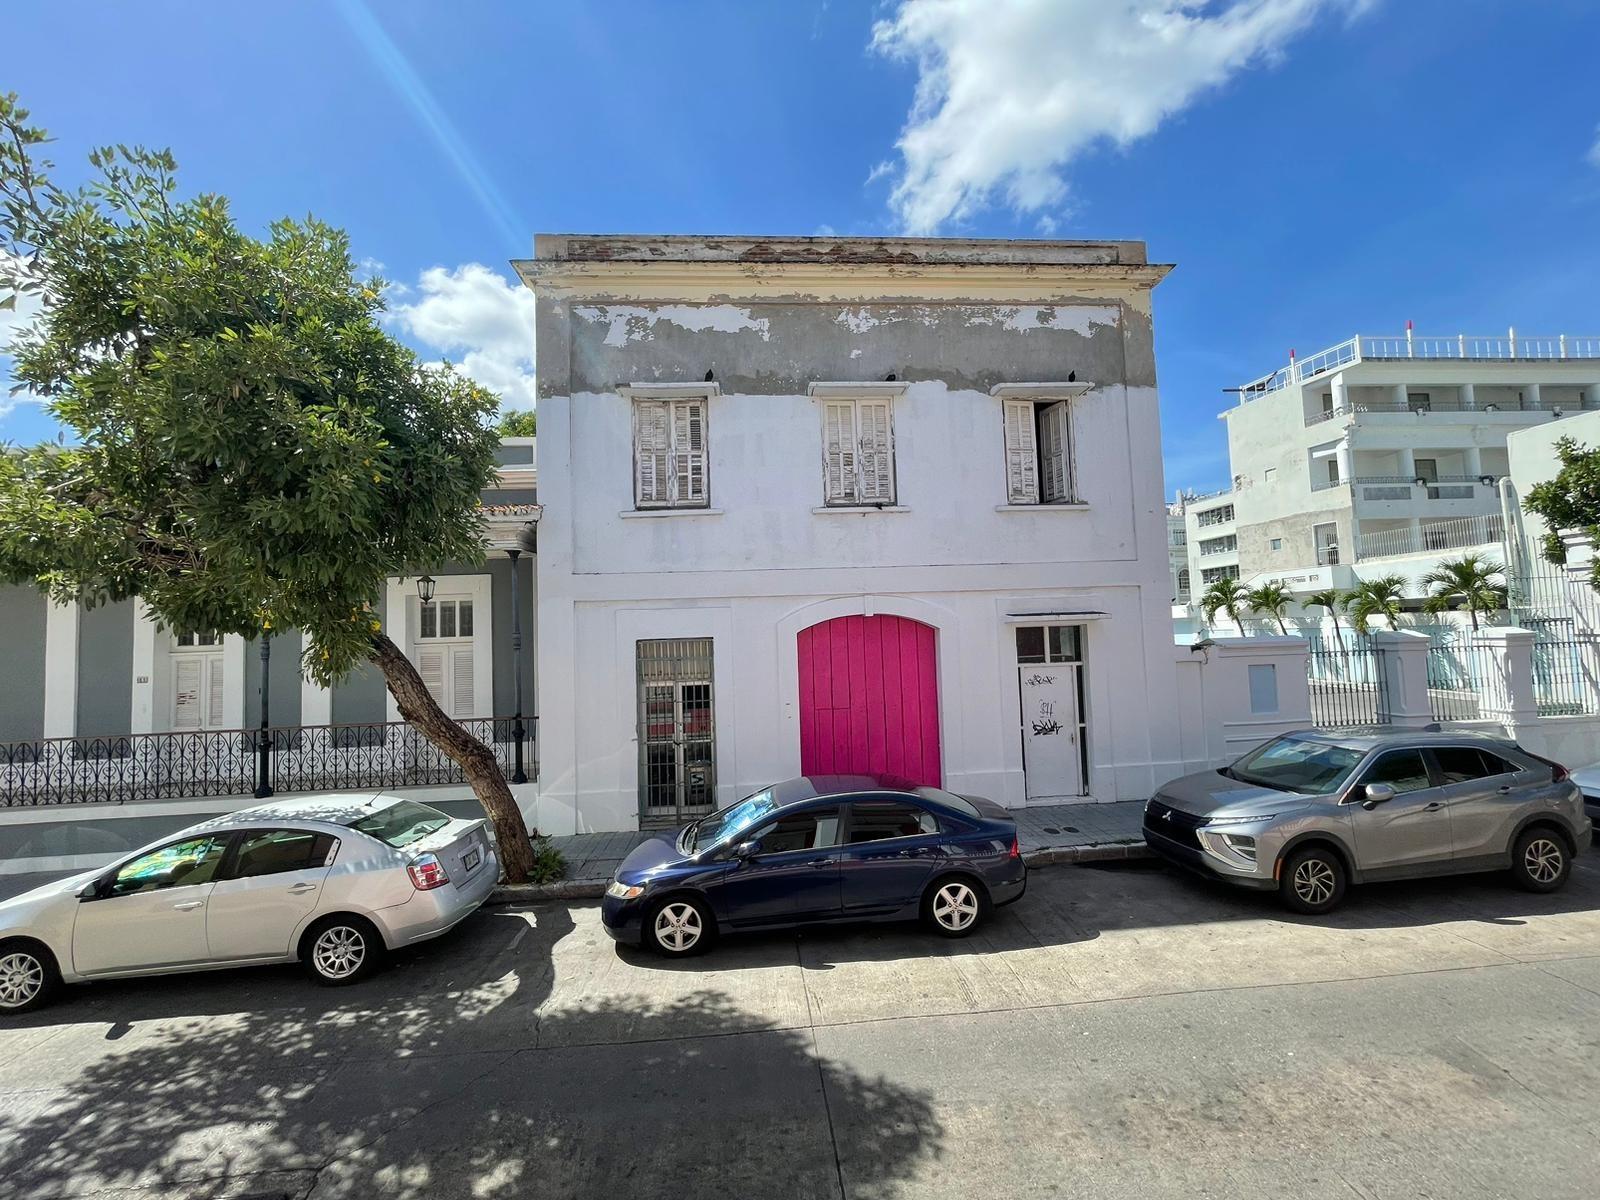 75 CRISTINA ST, Ponce, Puerto Rico 00730, ,Commercial Lease,For Rent,CRISTINA ST,PR9102986